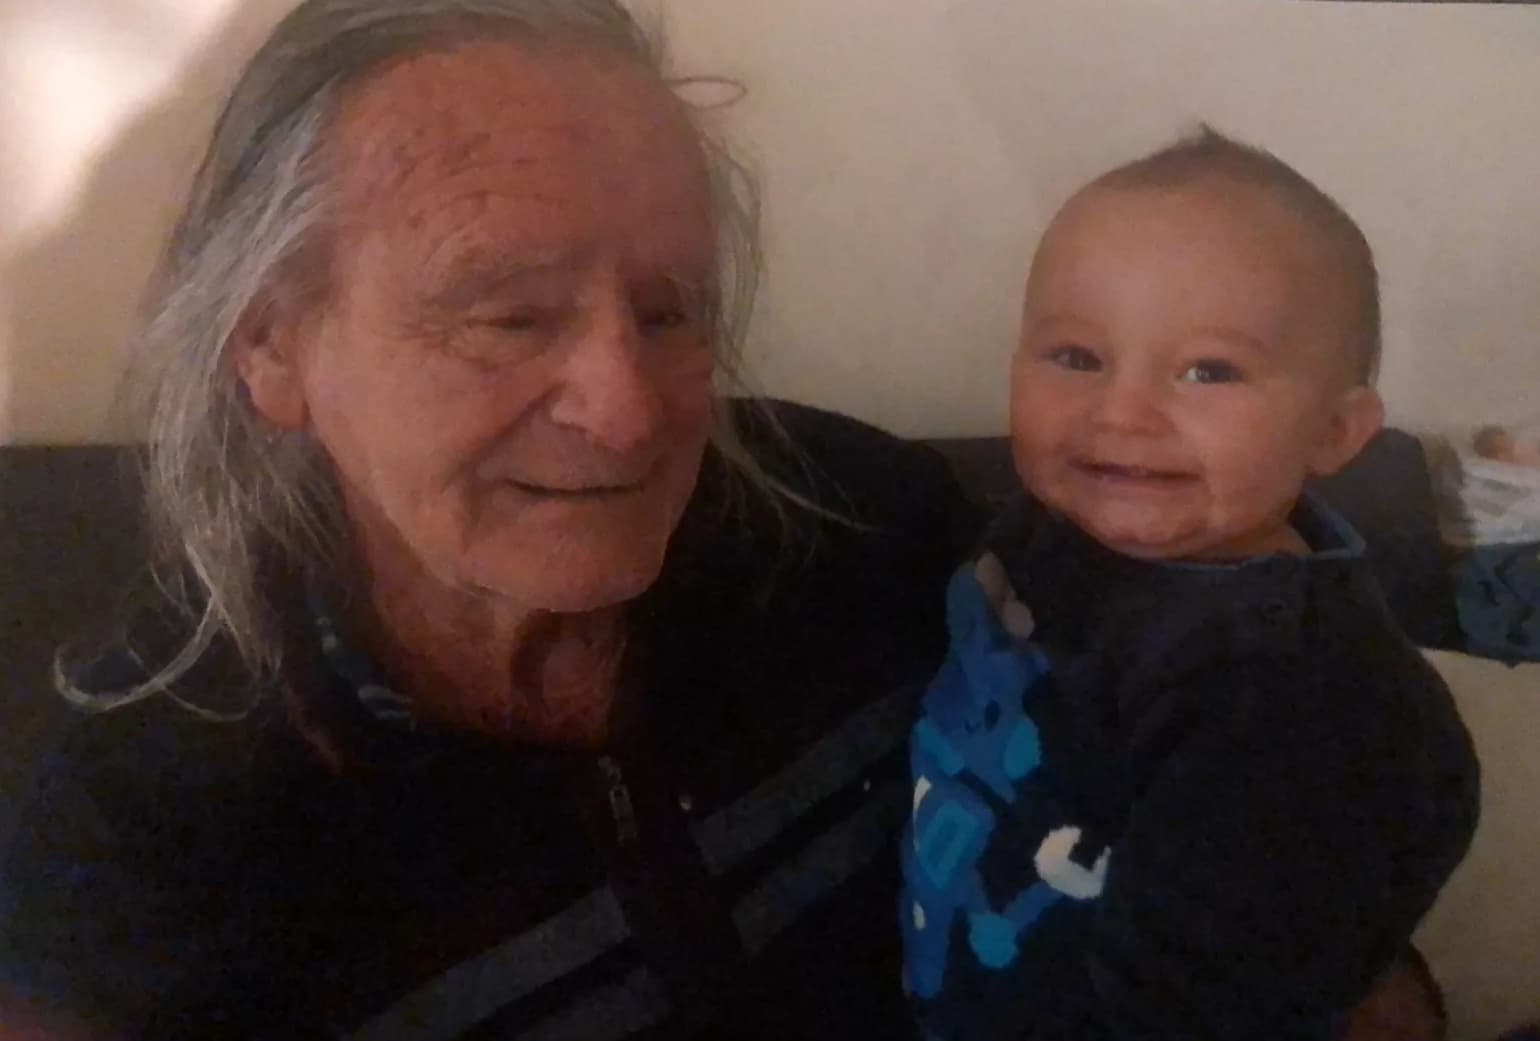 An elderly man with long grey hair holding a smiling baby in a blue shirt